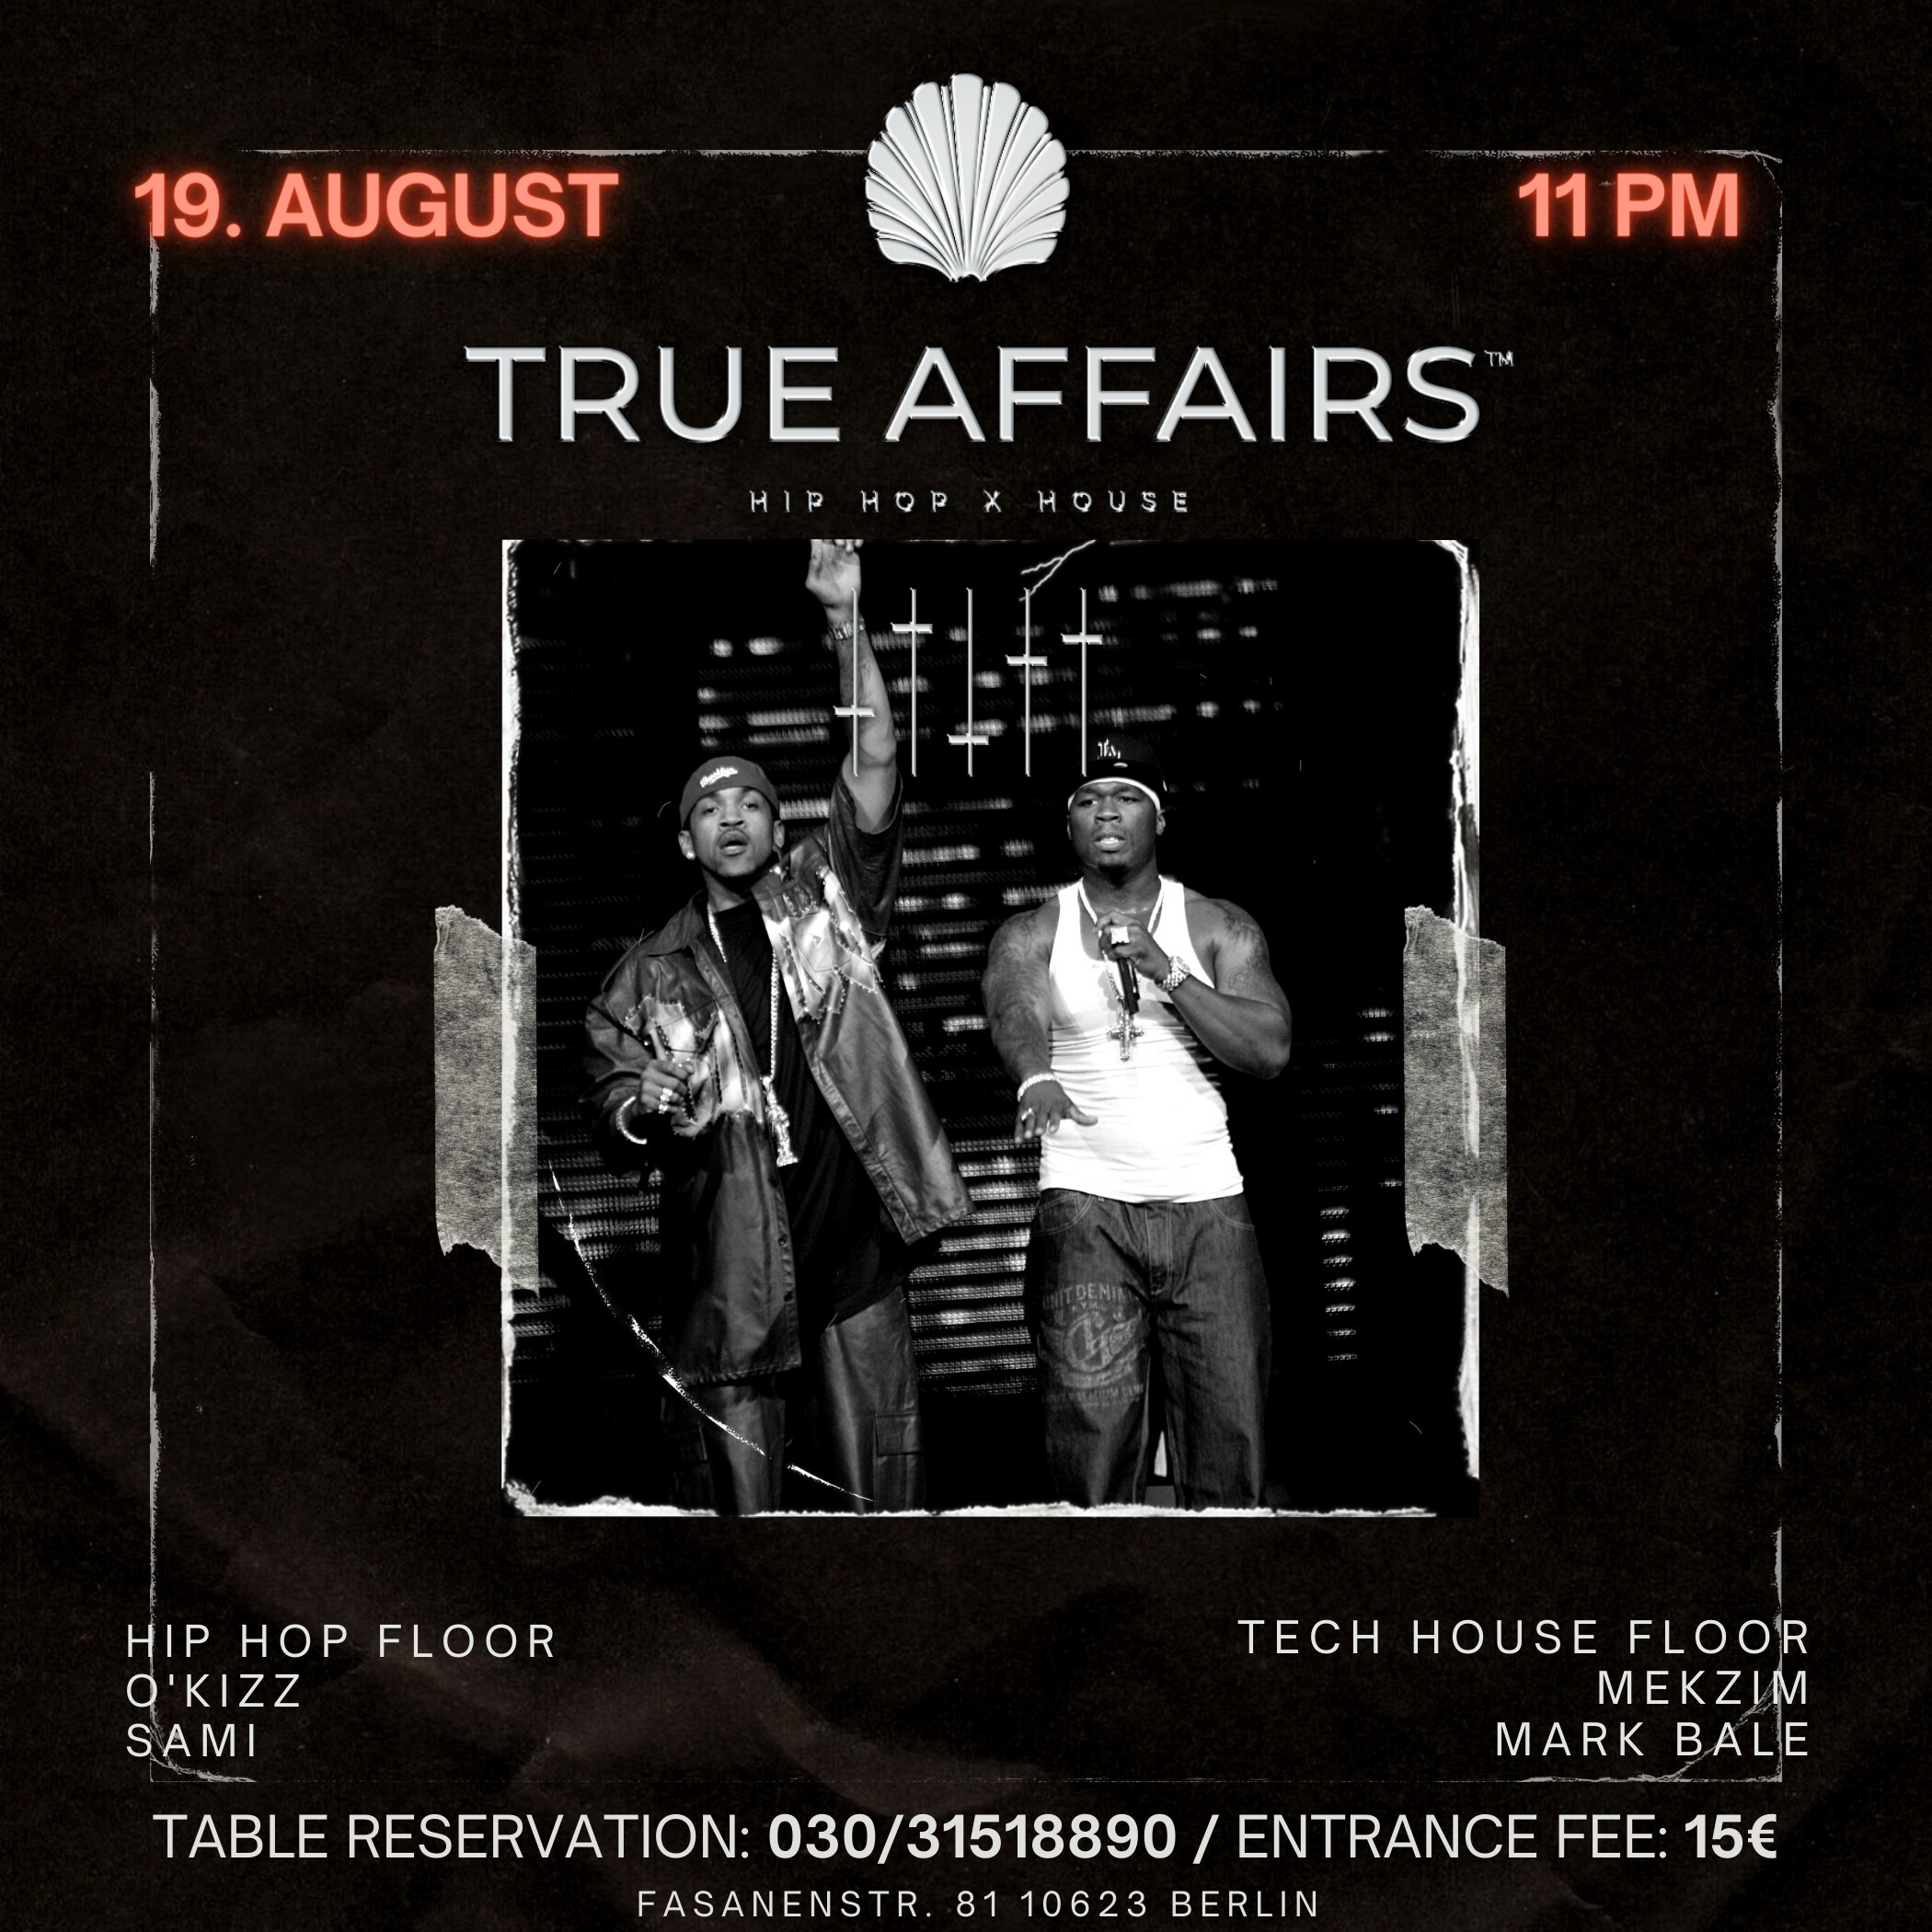 The Pearl 19.08.2022 The Pearl pres. True Affairs